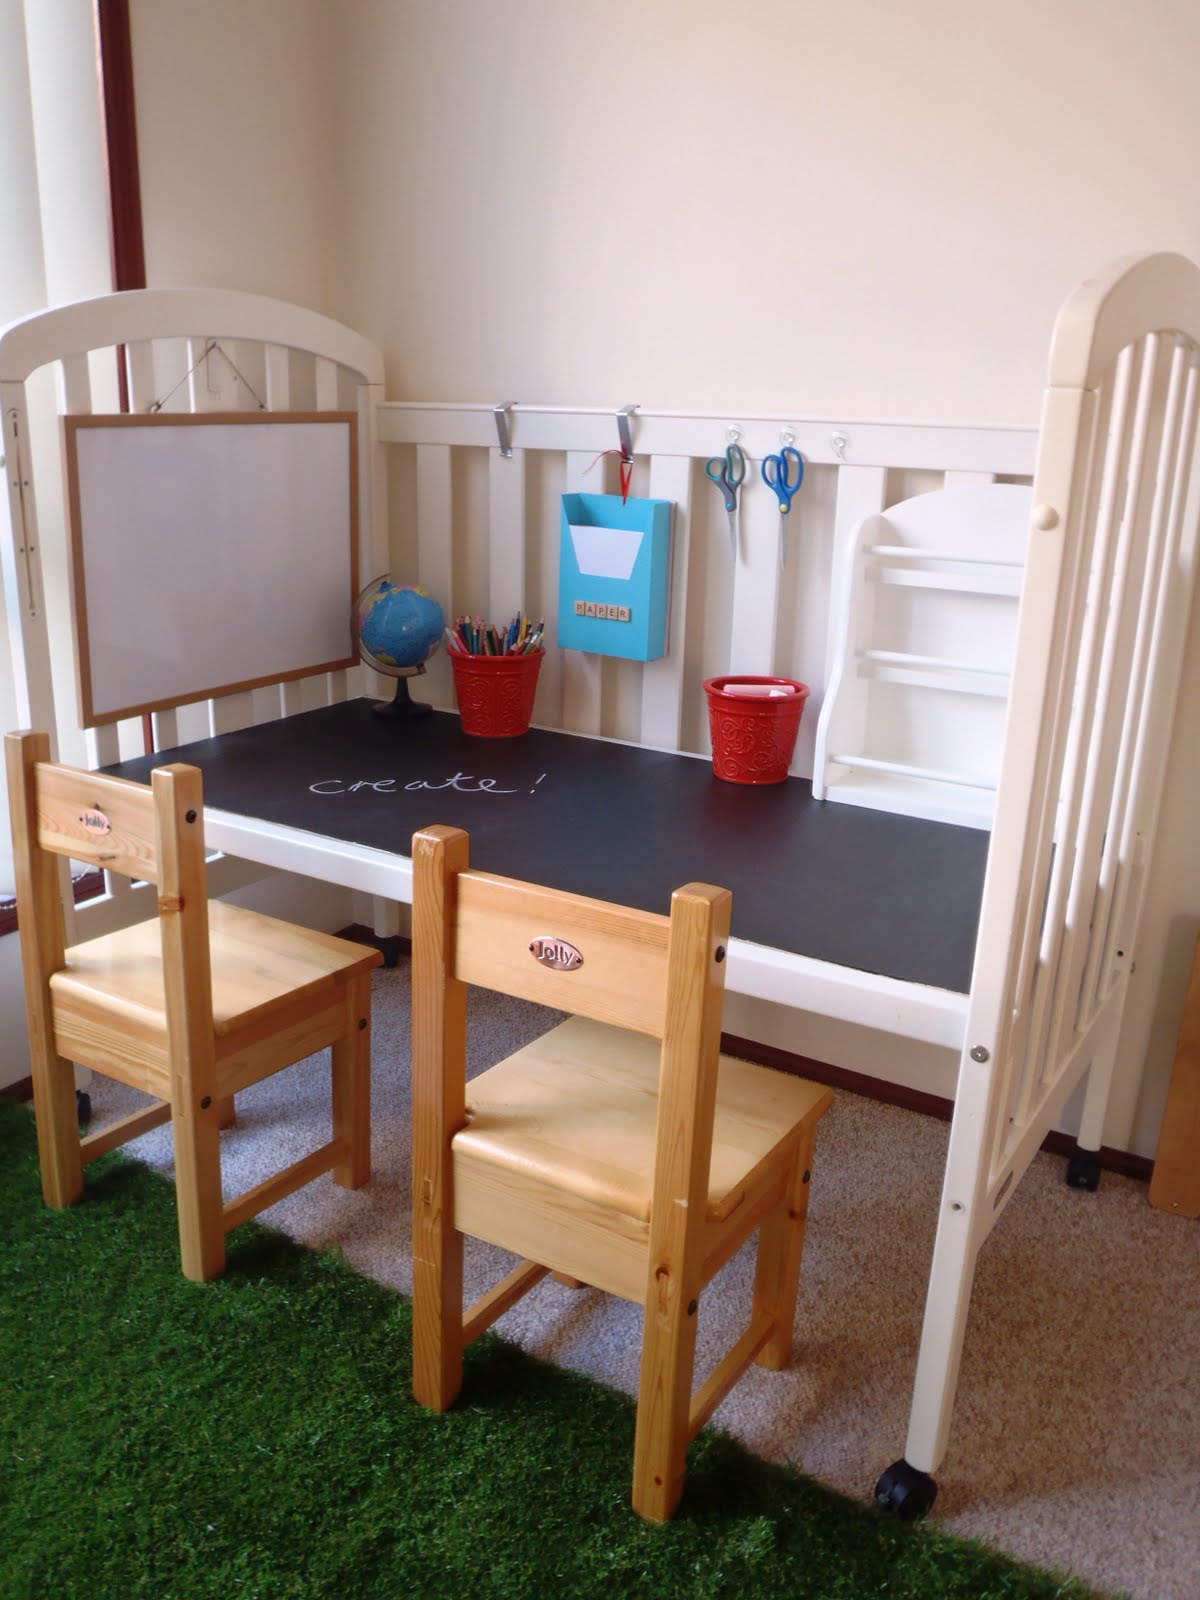 An Old Crib Into A Child’s Workstation.